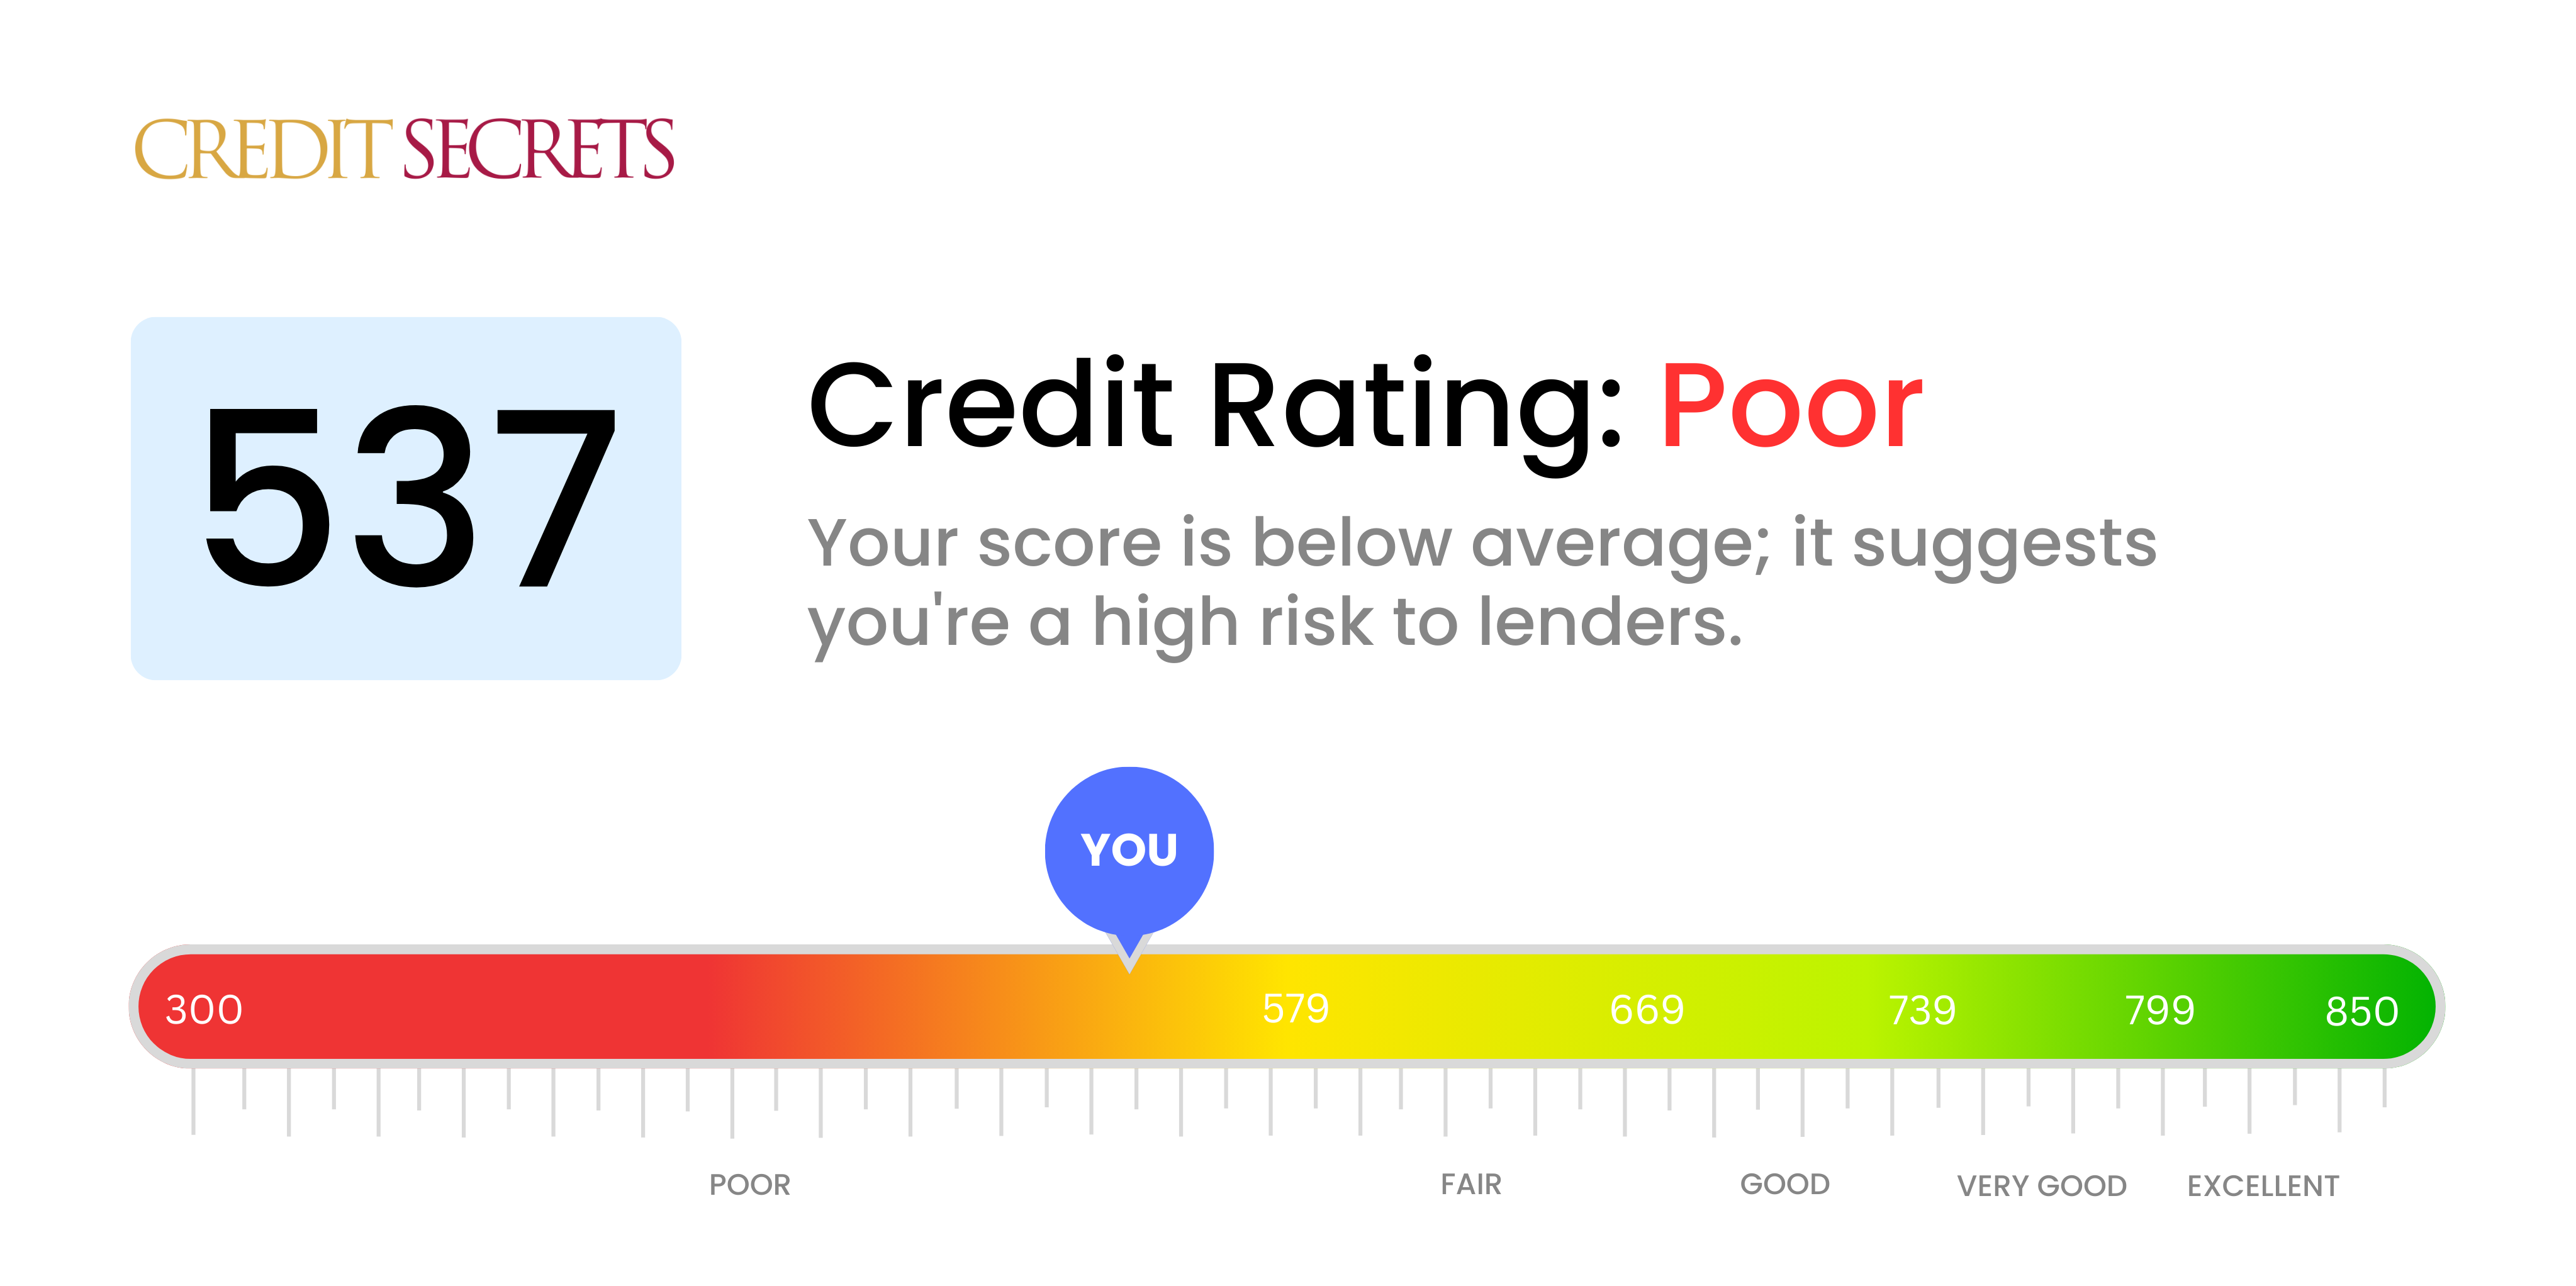 Is 537 a good credit score?